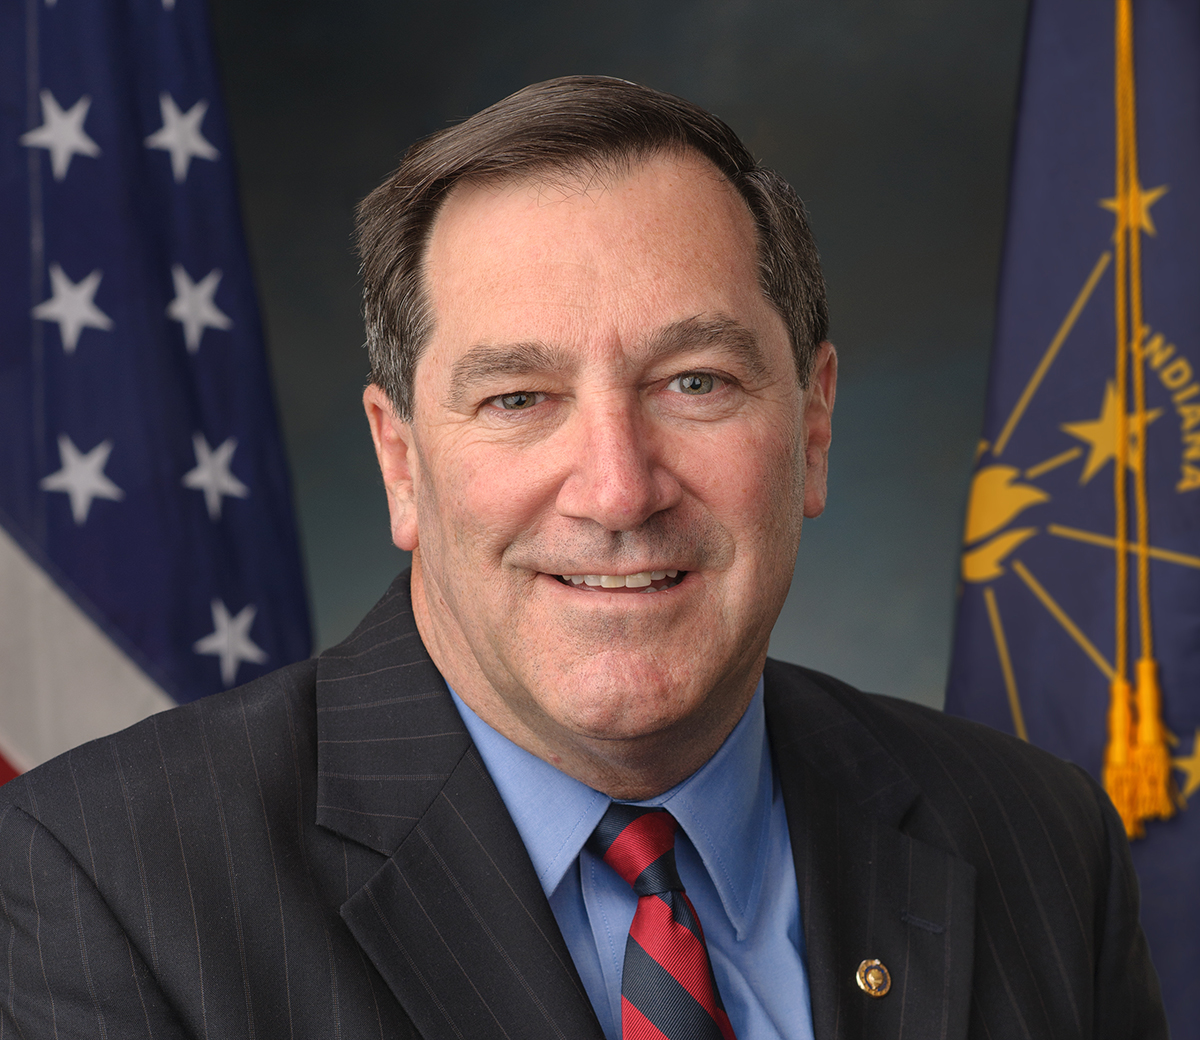 sen-donnelly-says-no-to-the-graham-cassidy-health-care-bill-indiana